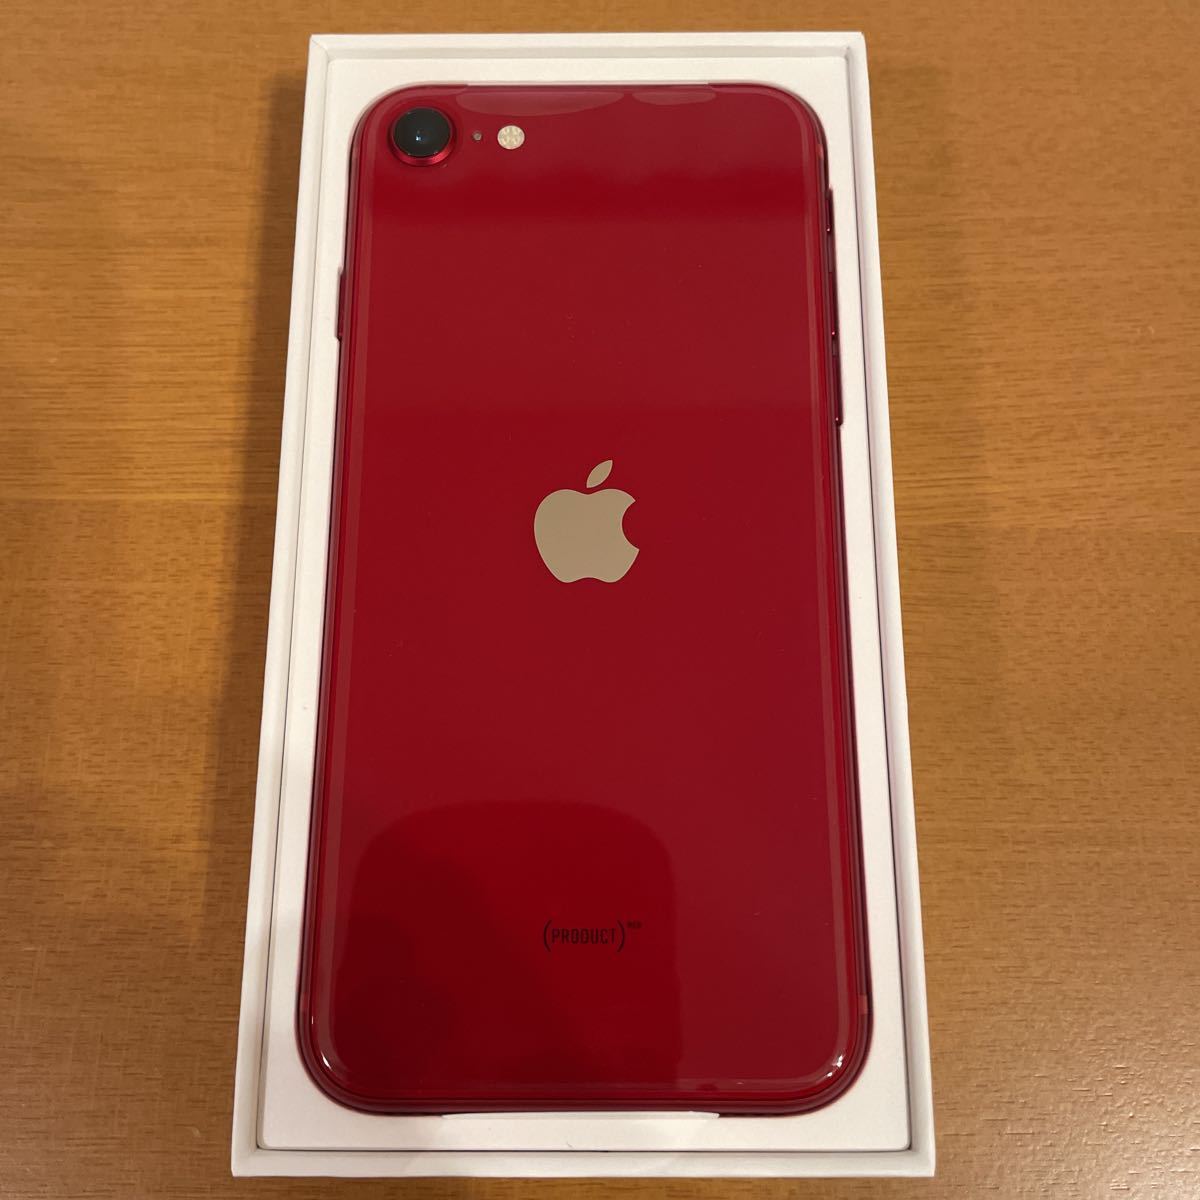 iPhone SE 第3世代128G (PRODUCT)RED simフリー | myglobaltax.com